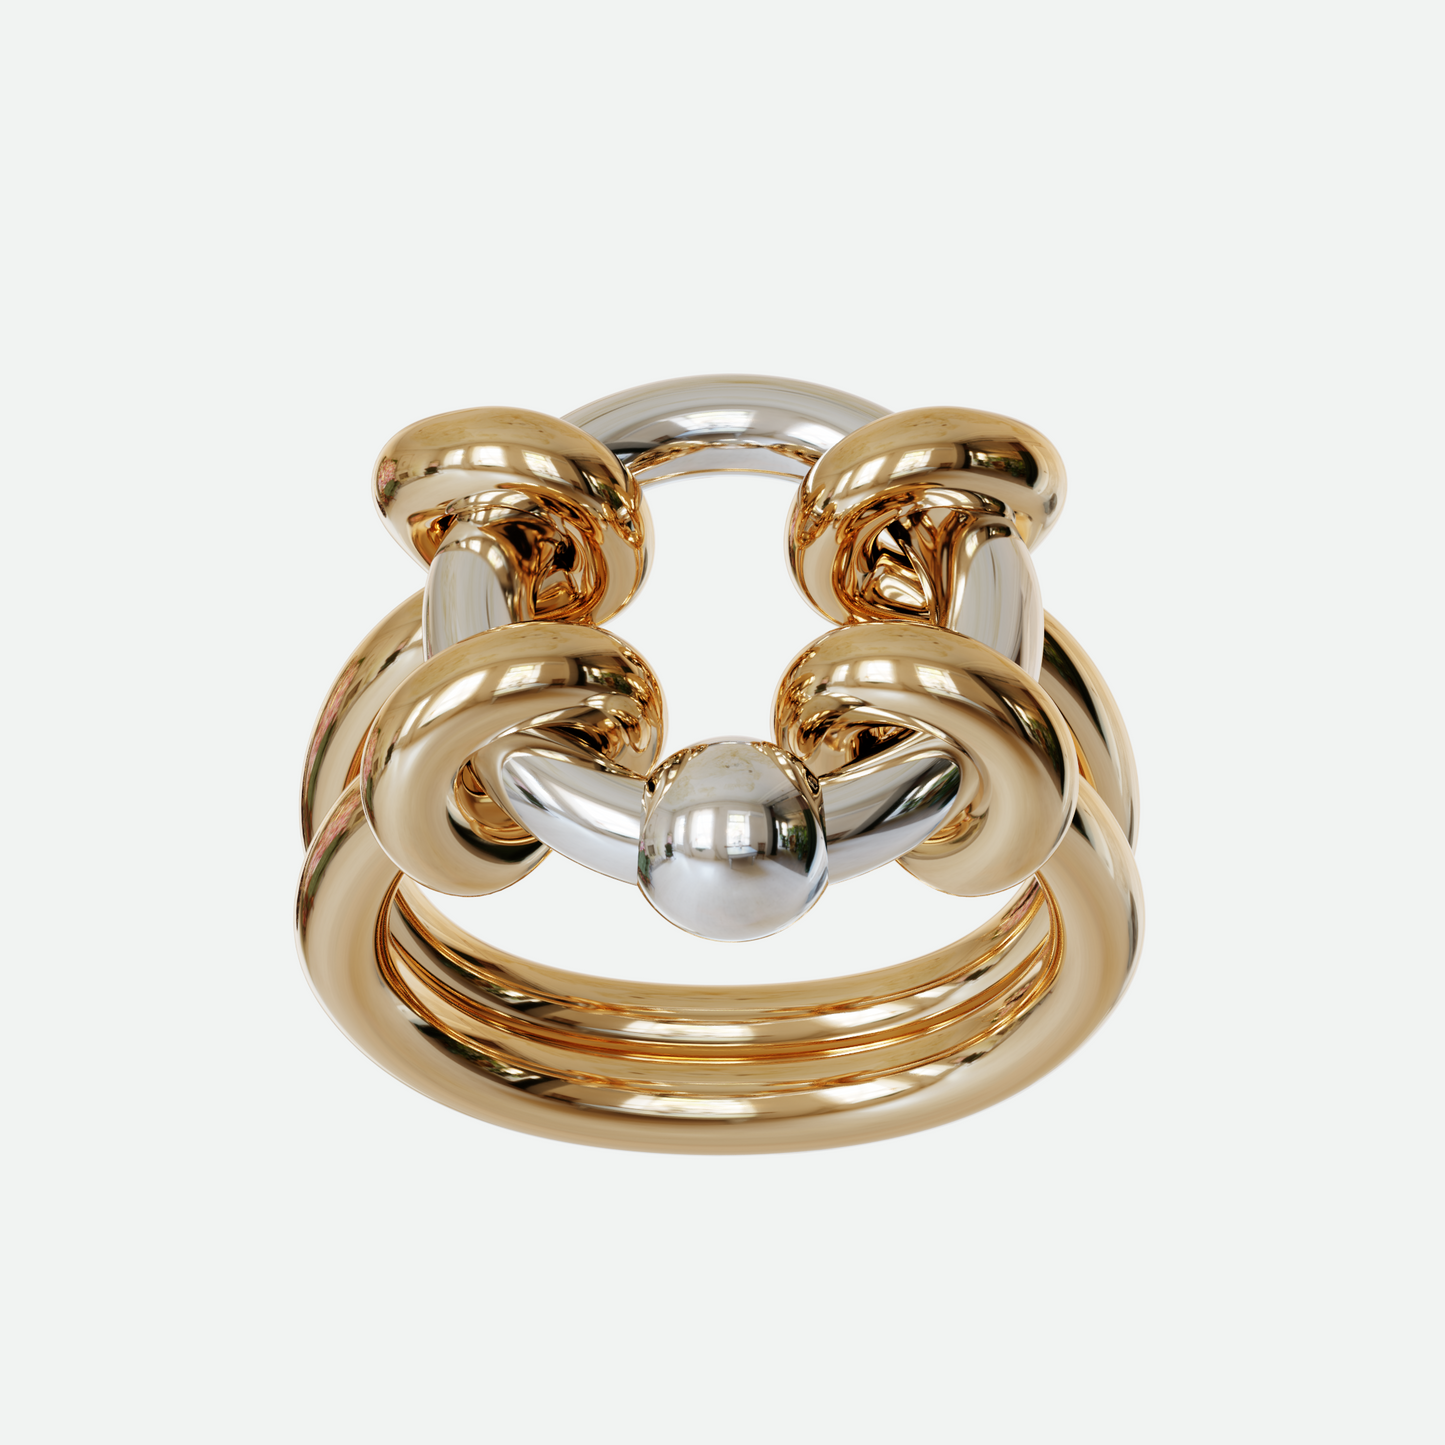 Captive Ring with a silver O-shaped piercing interlaced within a golden loop, emphasizing a striking contrast of metals, designed by Ruggeri.